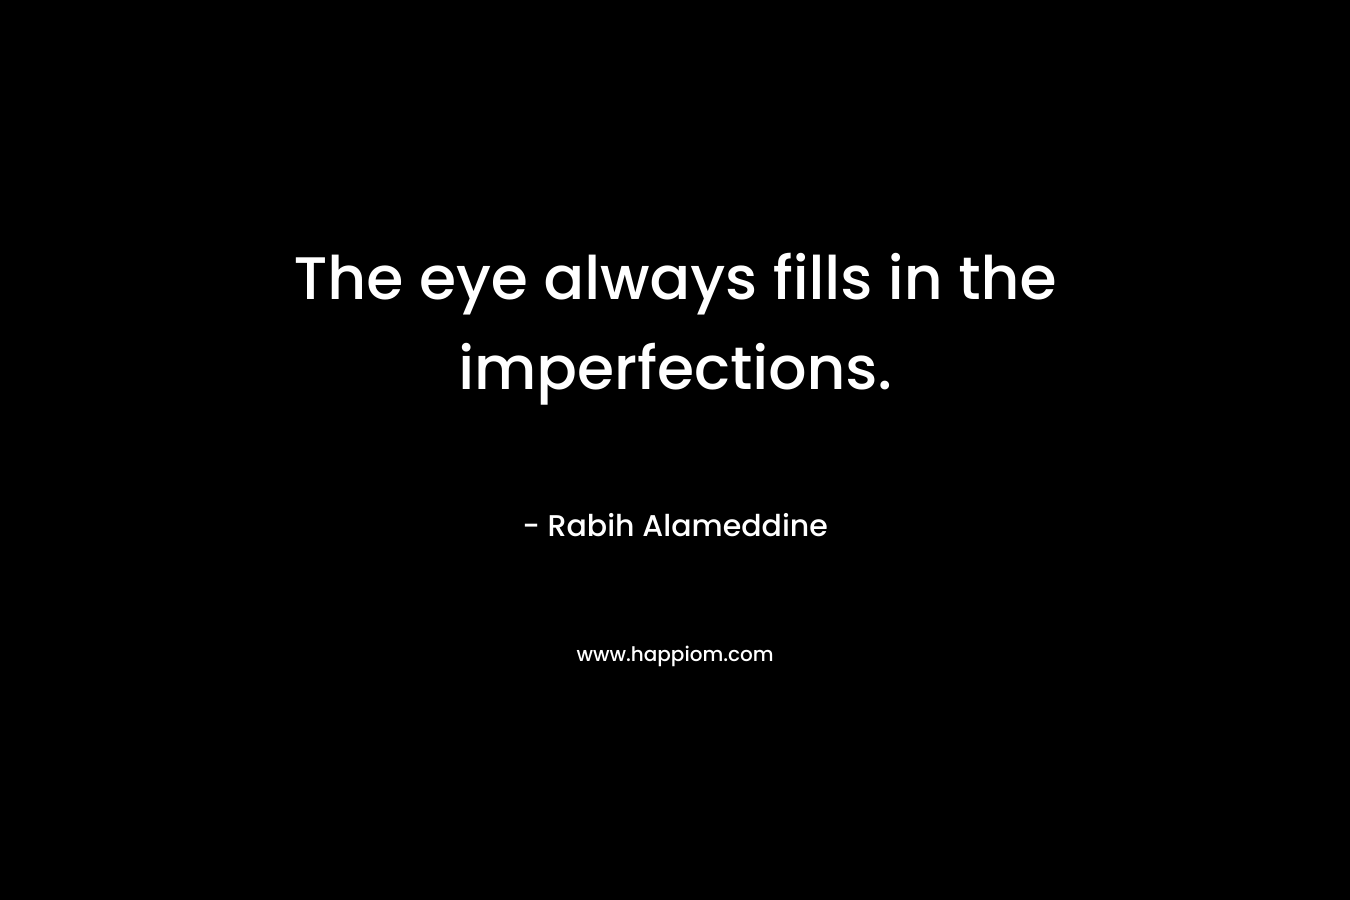 The eye always fills in the imperfections. – Rabih Alameddine